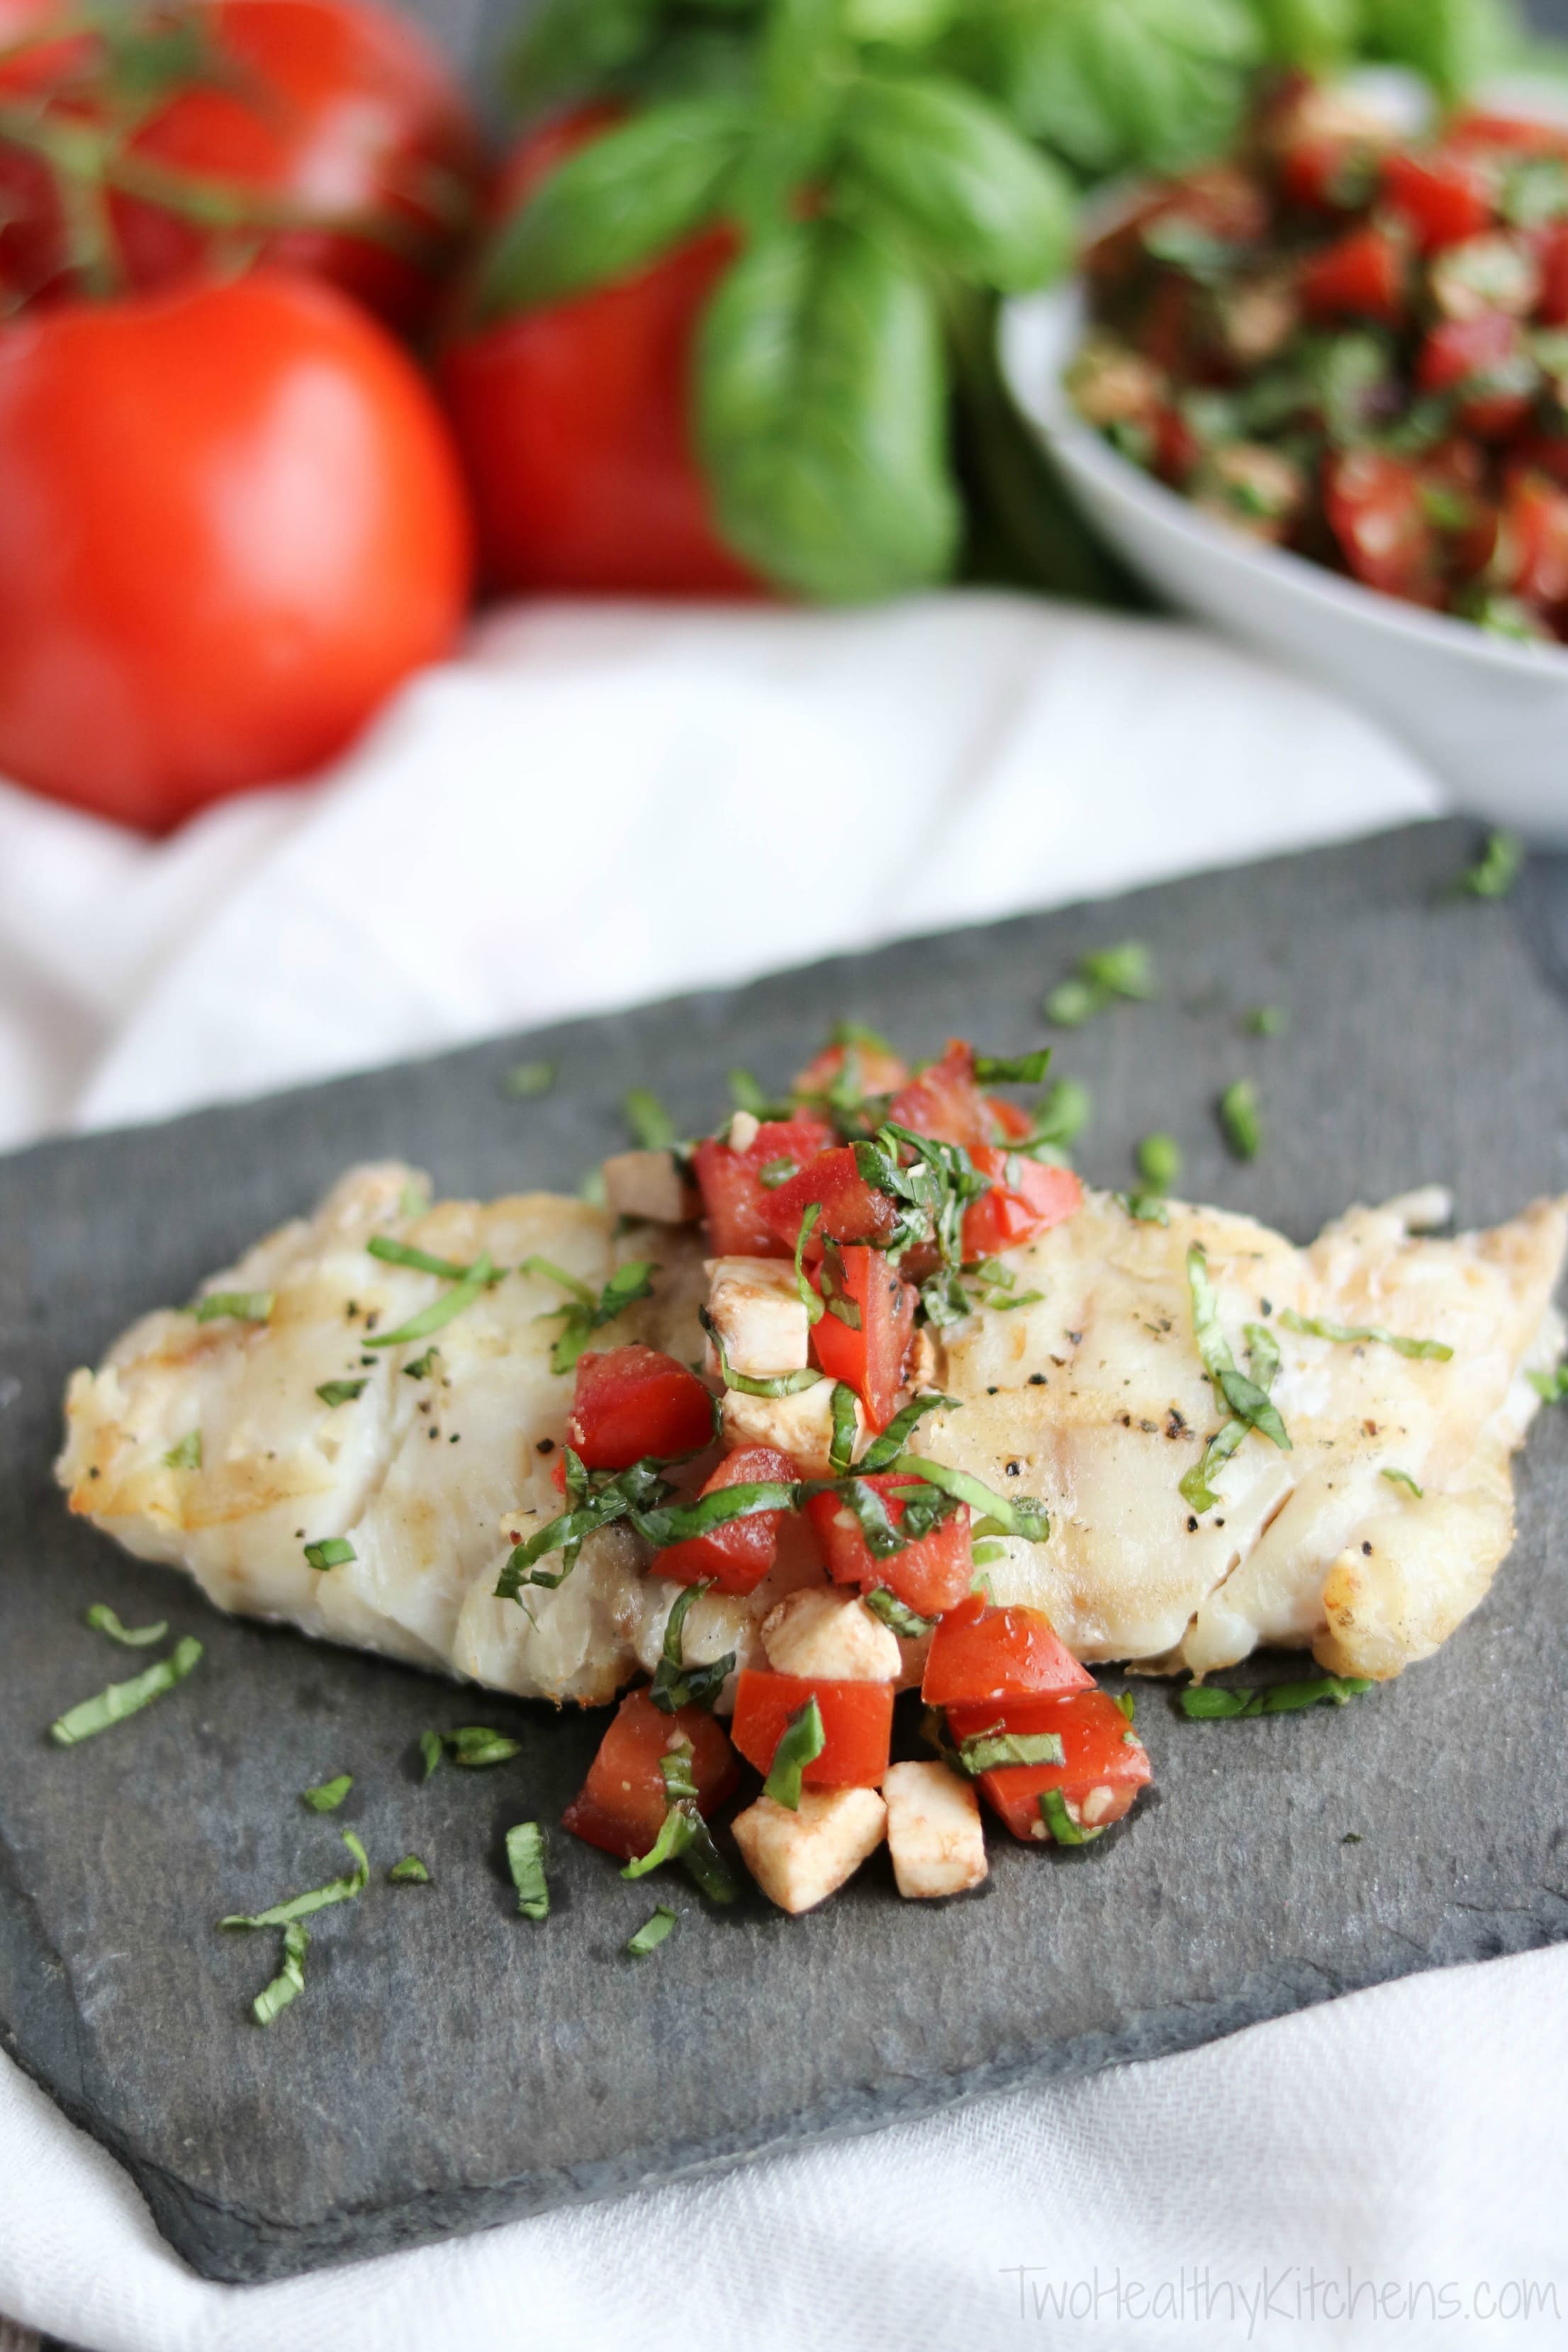 Caprese Grilled Fish is super simple yet incredibly delicious - perfect with summer’s best tomatoes and basil! An easy grilling recipe for cookouts or casual family suppers! | www.TwoHealthyKitchens.com